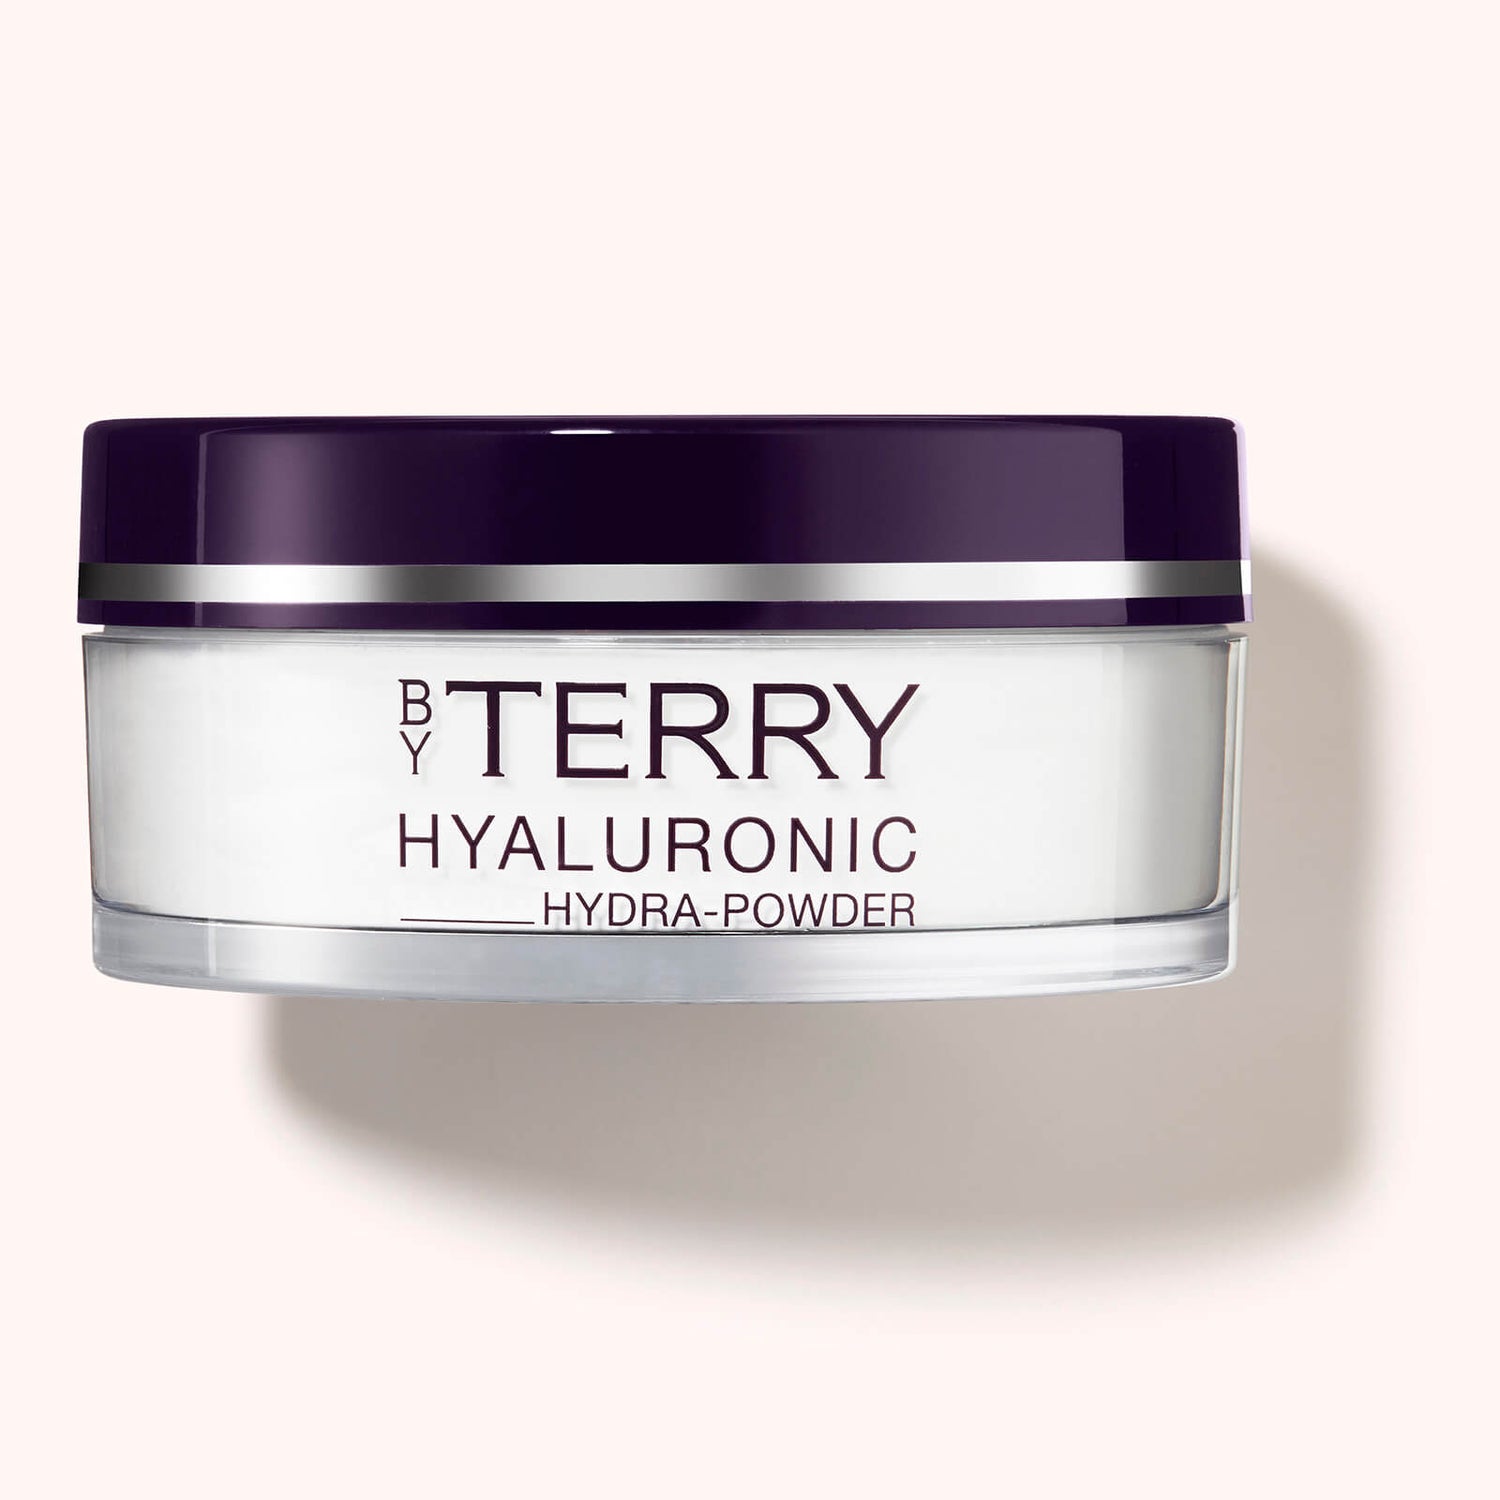 Poudre Libre Matifiante Hyaluronic Hydra-Powder By Terry 10 g